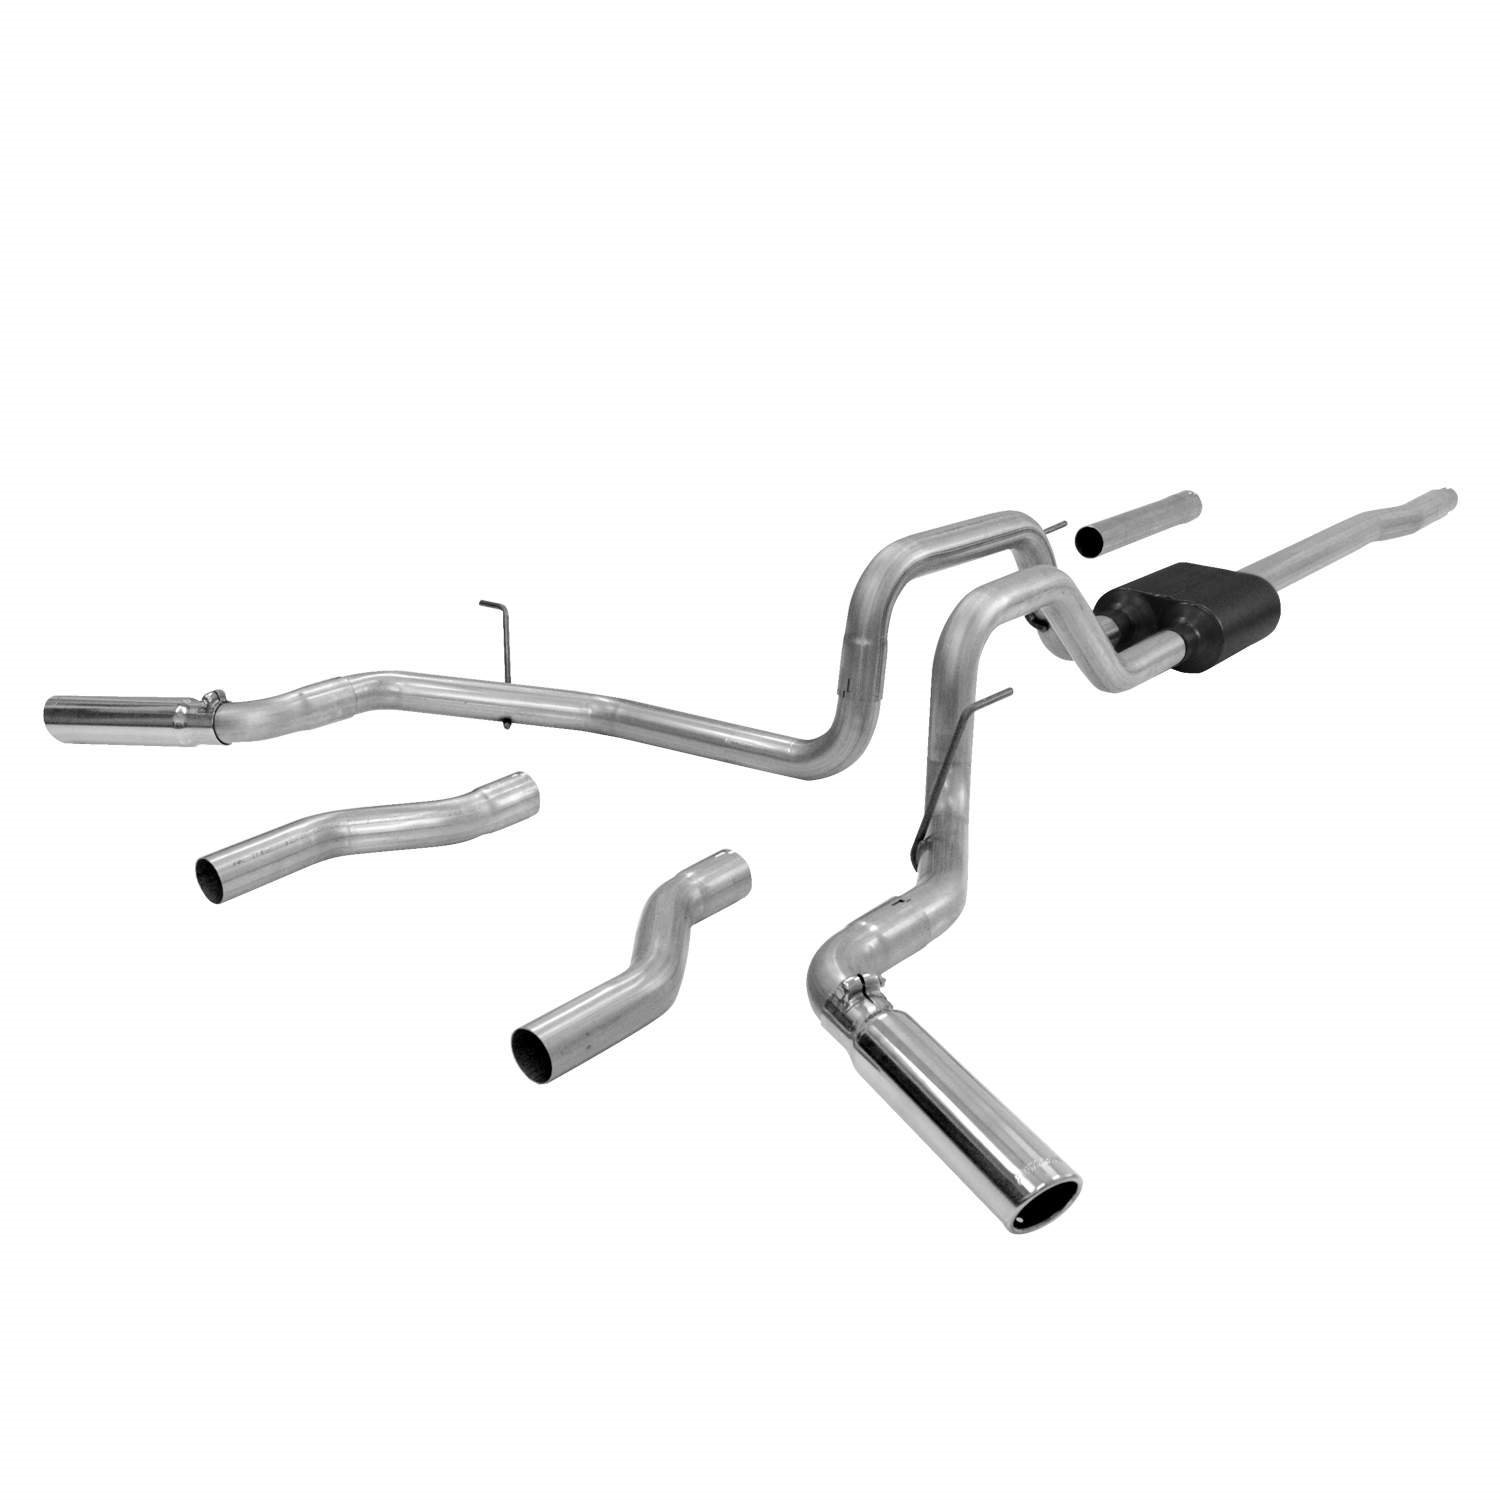 817417 American Thunder Cat-Back Exhaust System 2004-2008 Ford F-150/Lincoln Mark LT Pickup 4.6L/5.4L